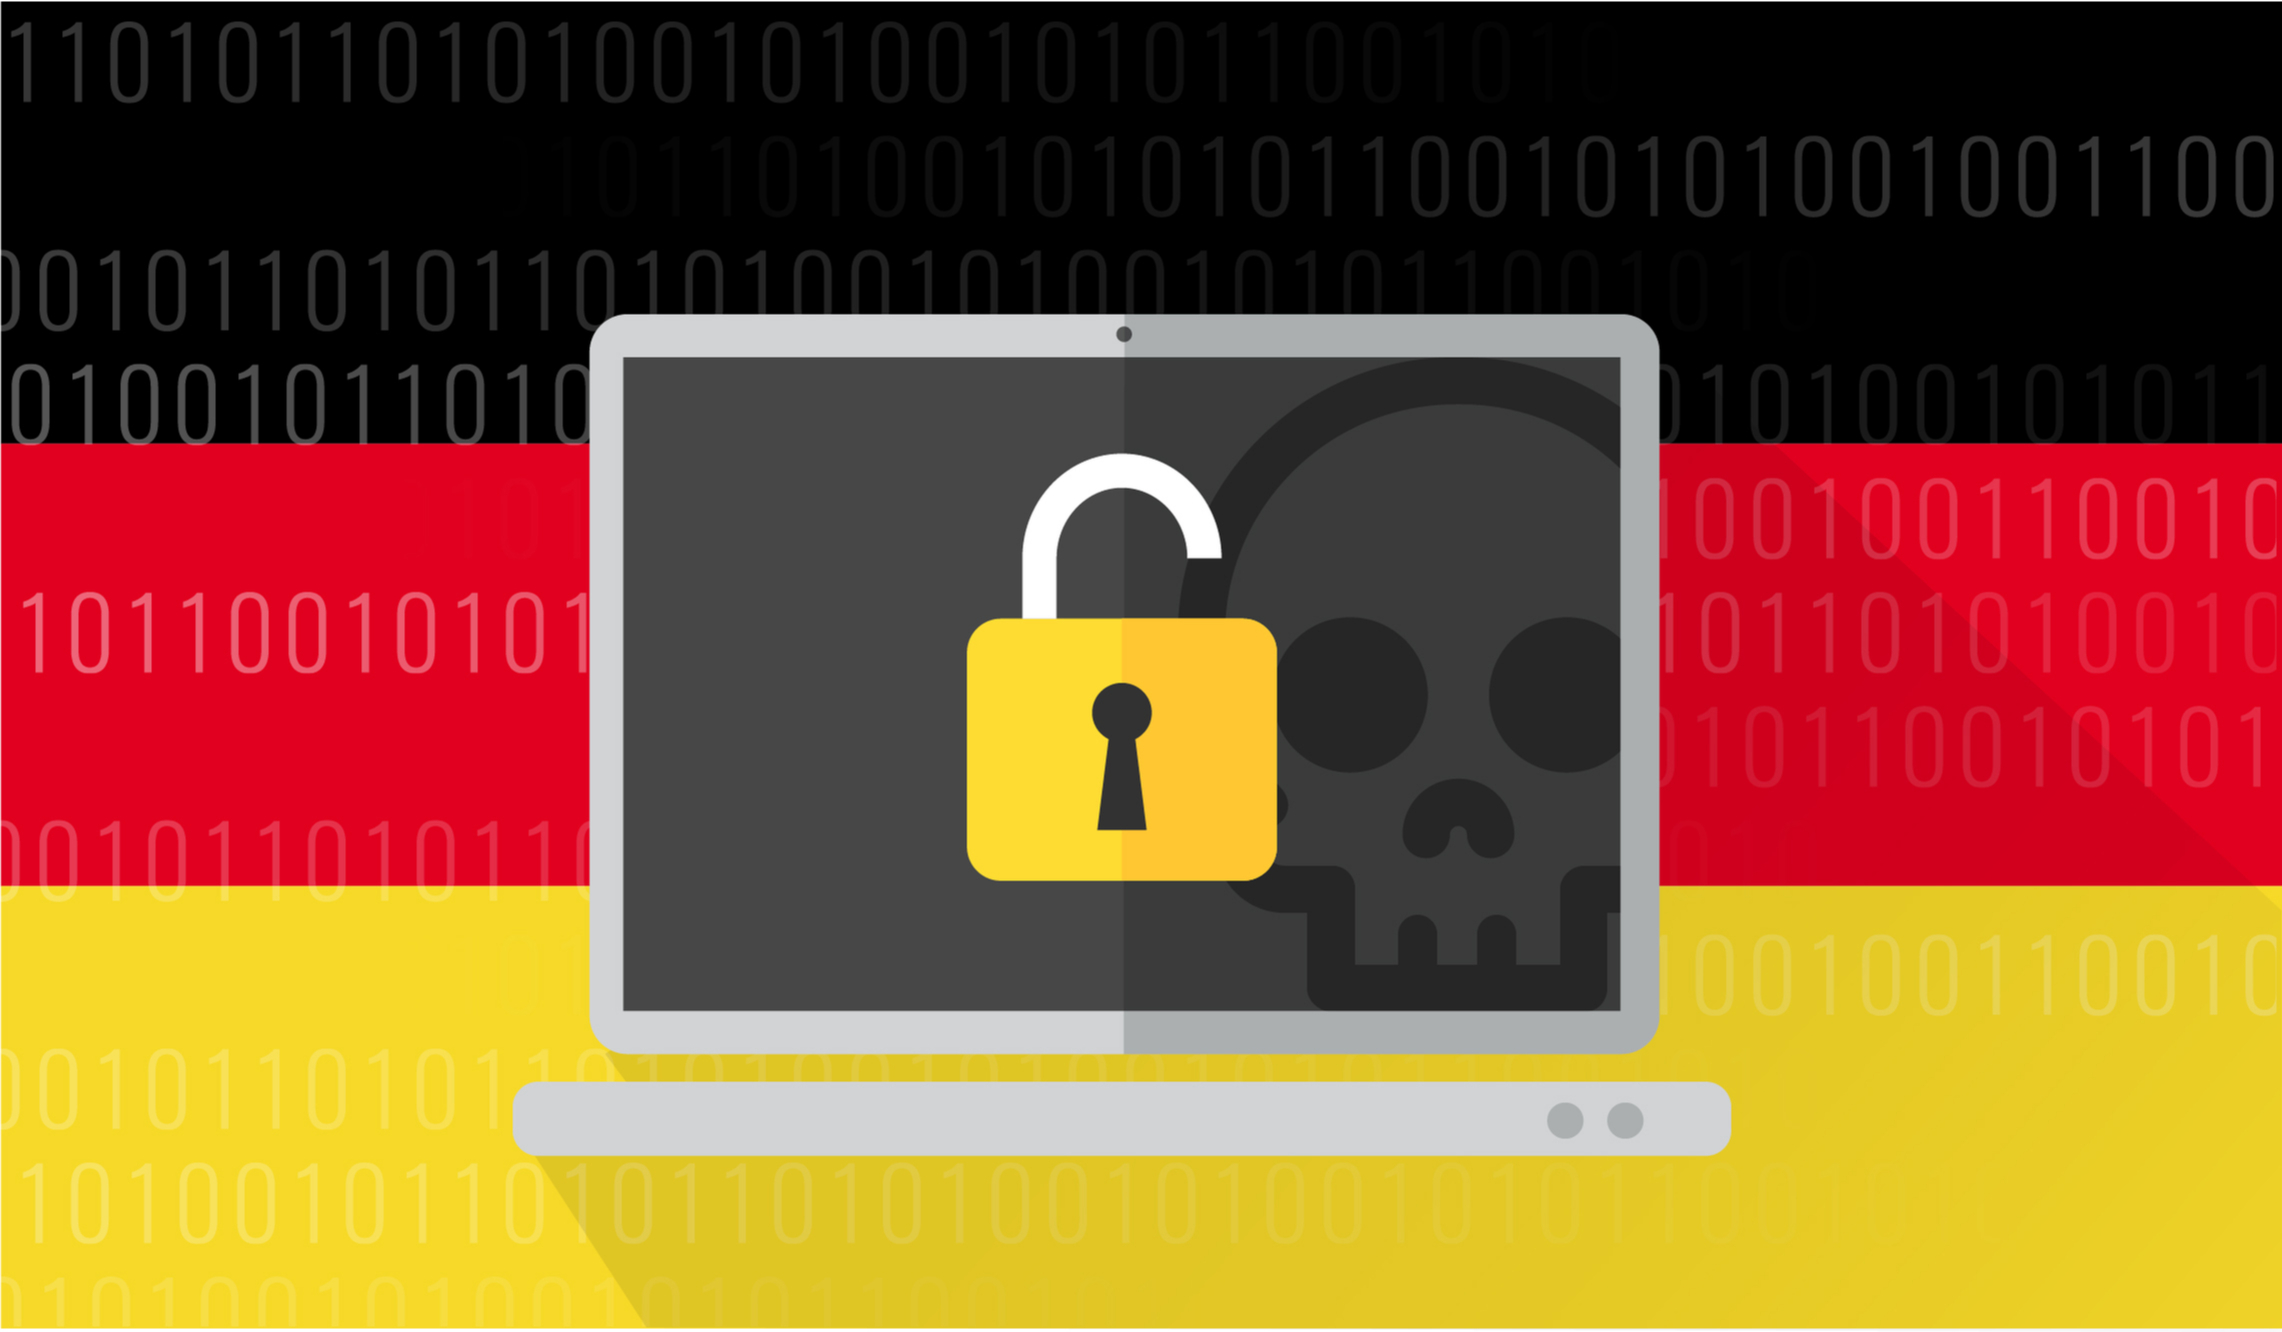 Cyber security Germany_illustration of a computer attacked by hacker cybercrime with germany flag background